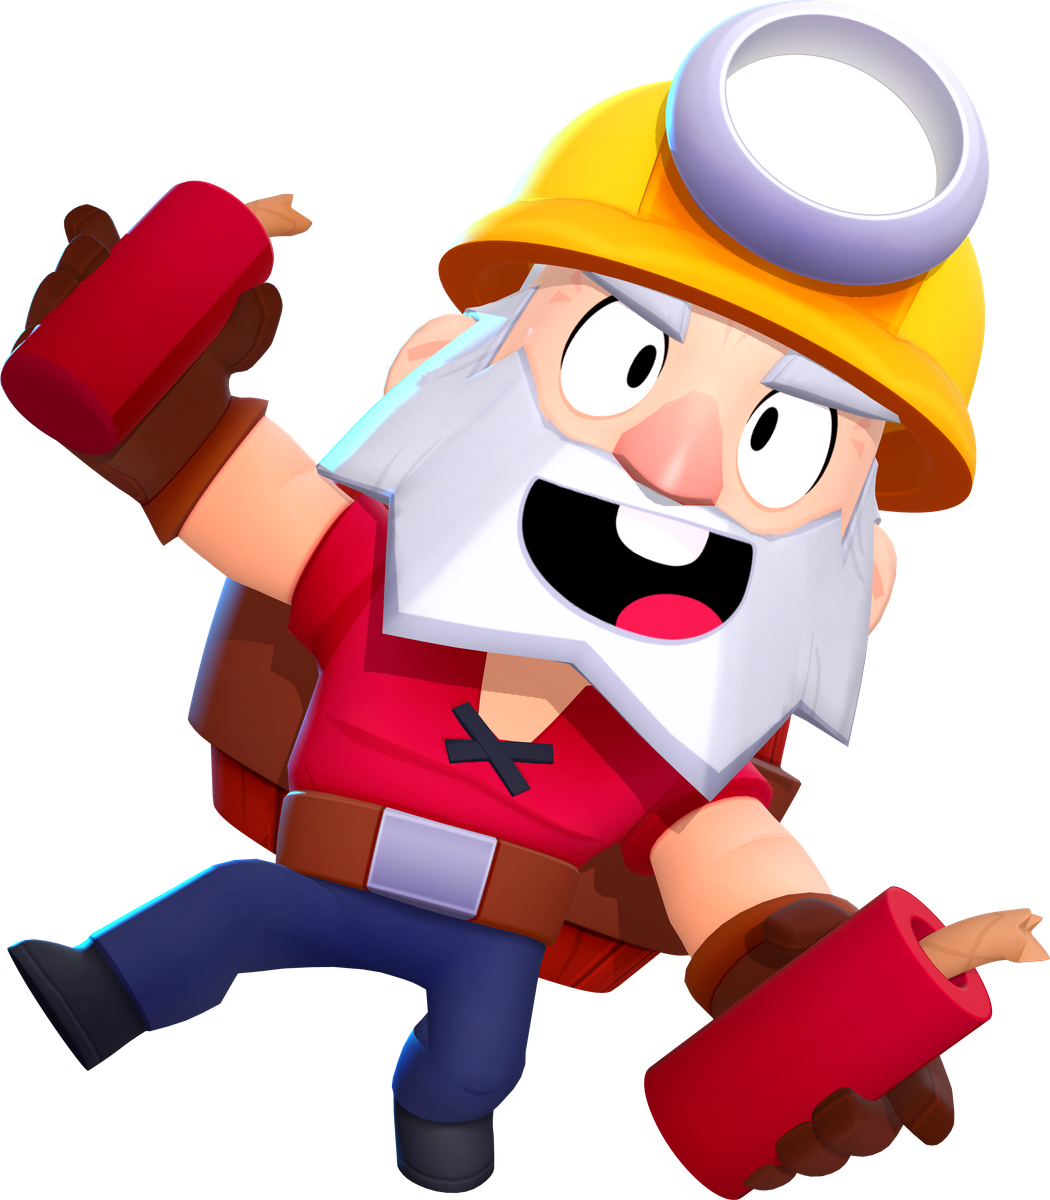 60 Hq Pictures Brawl Stars Dynamike Wiki Dynamike Brawl Star Complete